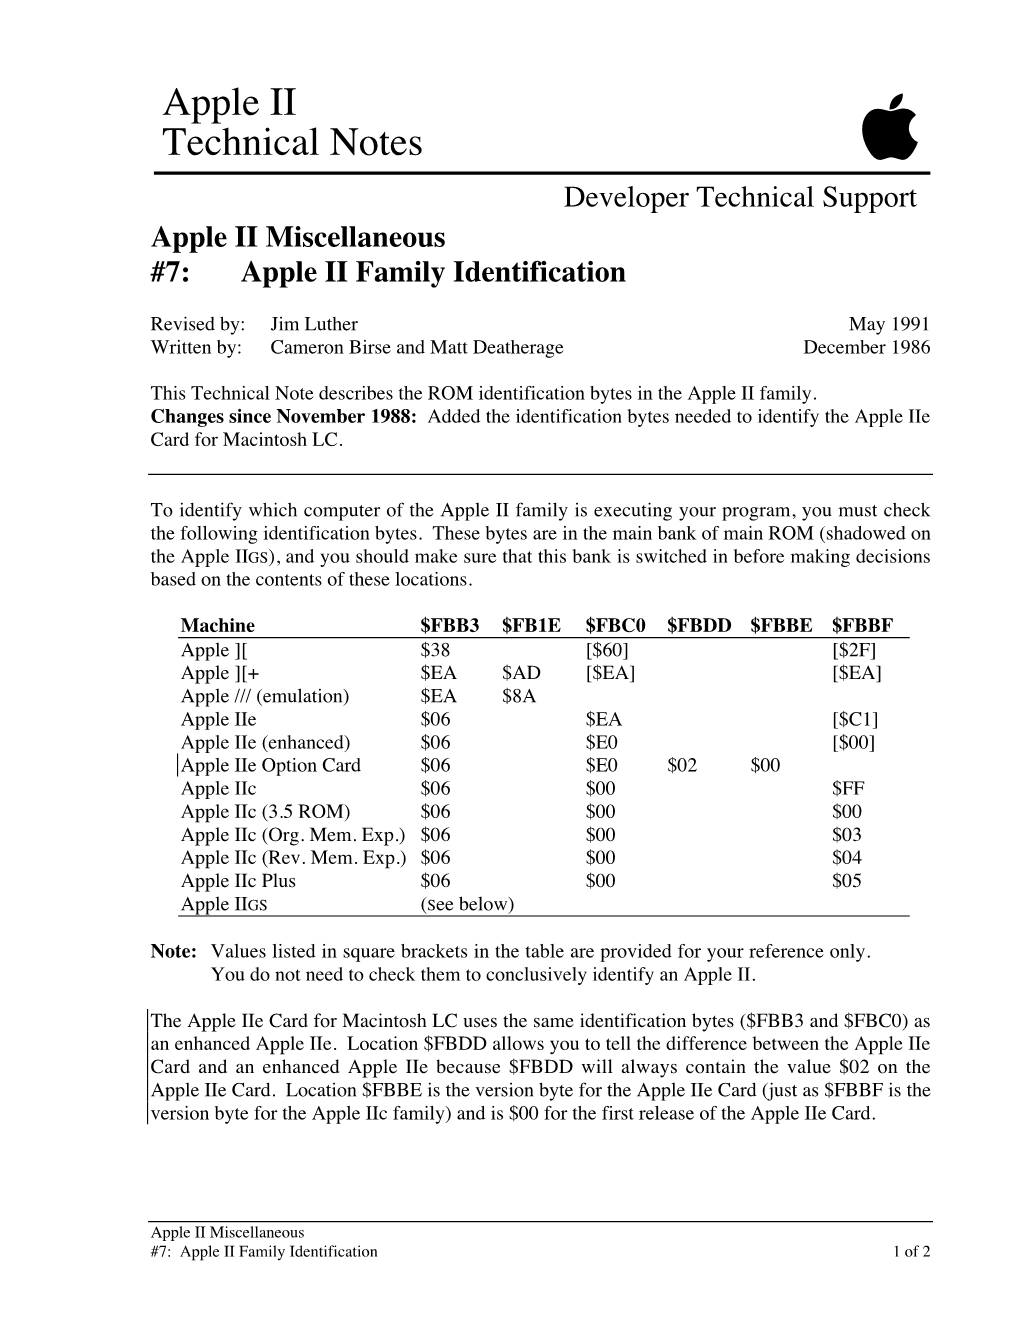 Apple II Technical Notes  Developer Technical Support Apple II Miscellaneous #7: Apple II Family Identification